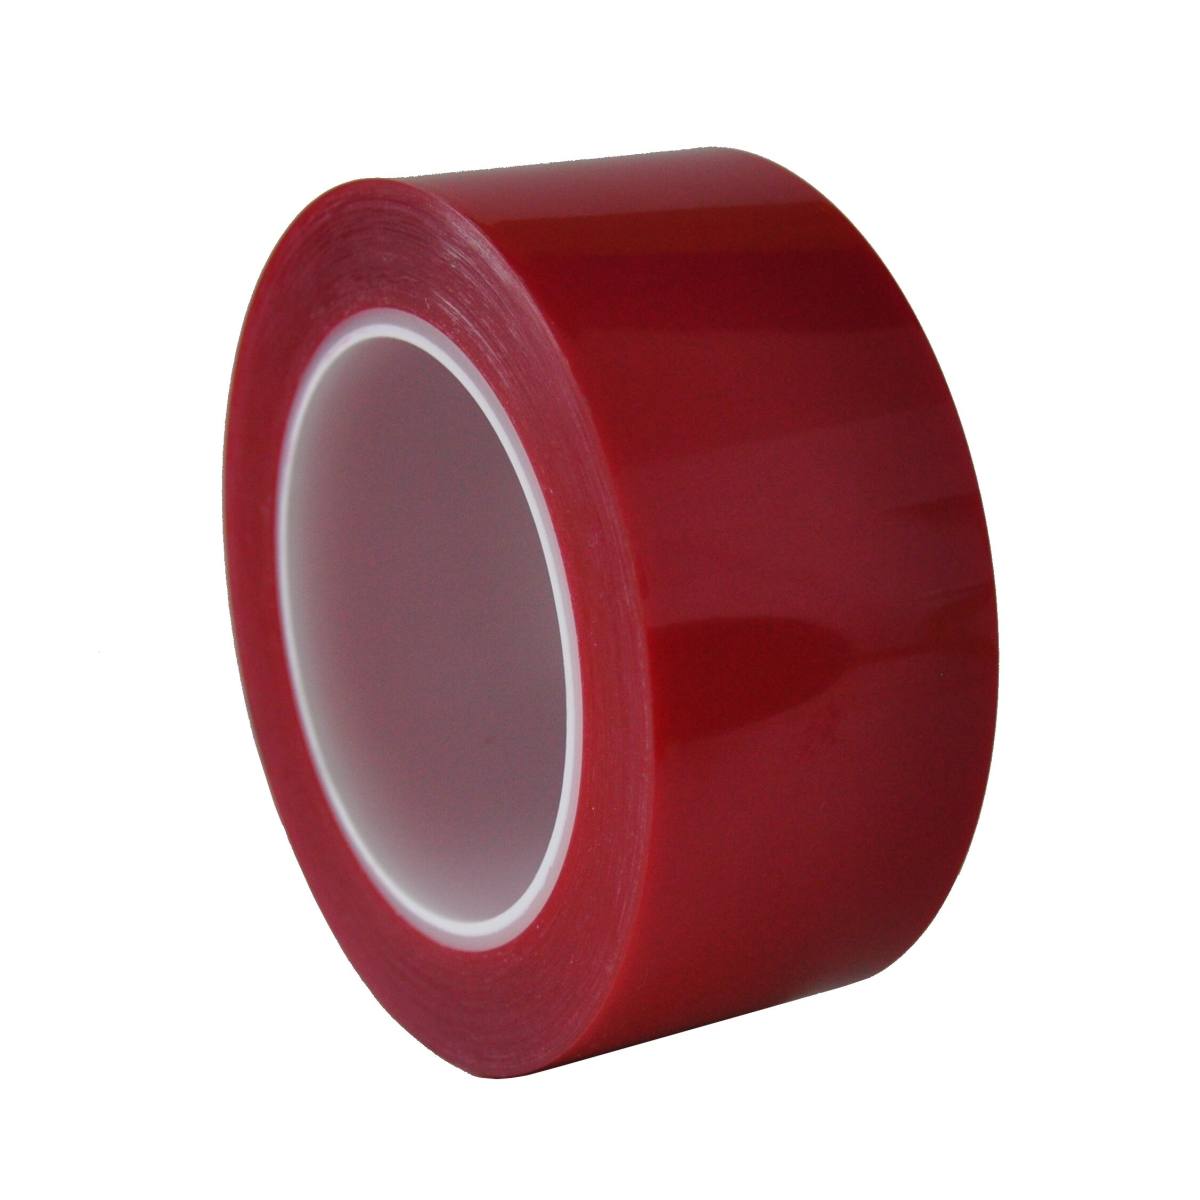 S-K-S 208R polyester adhesive tape, 19mmx66m, red